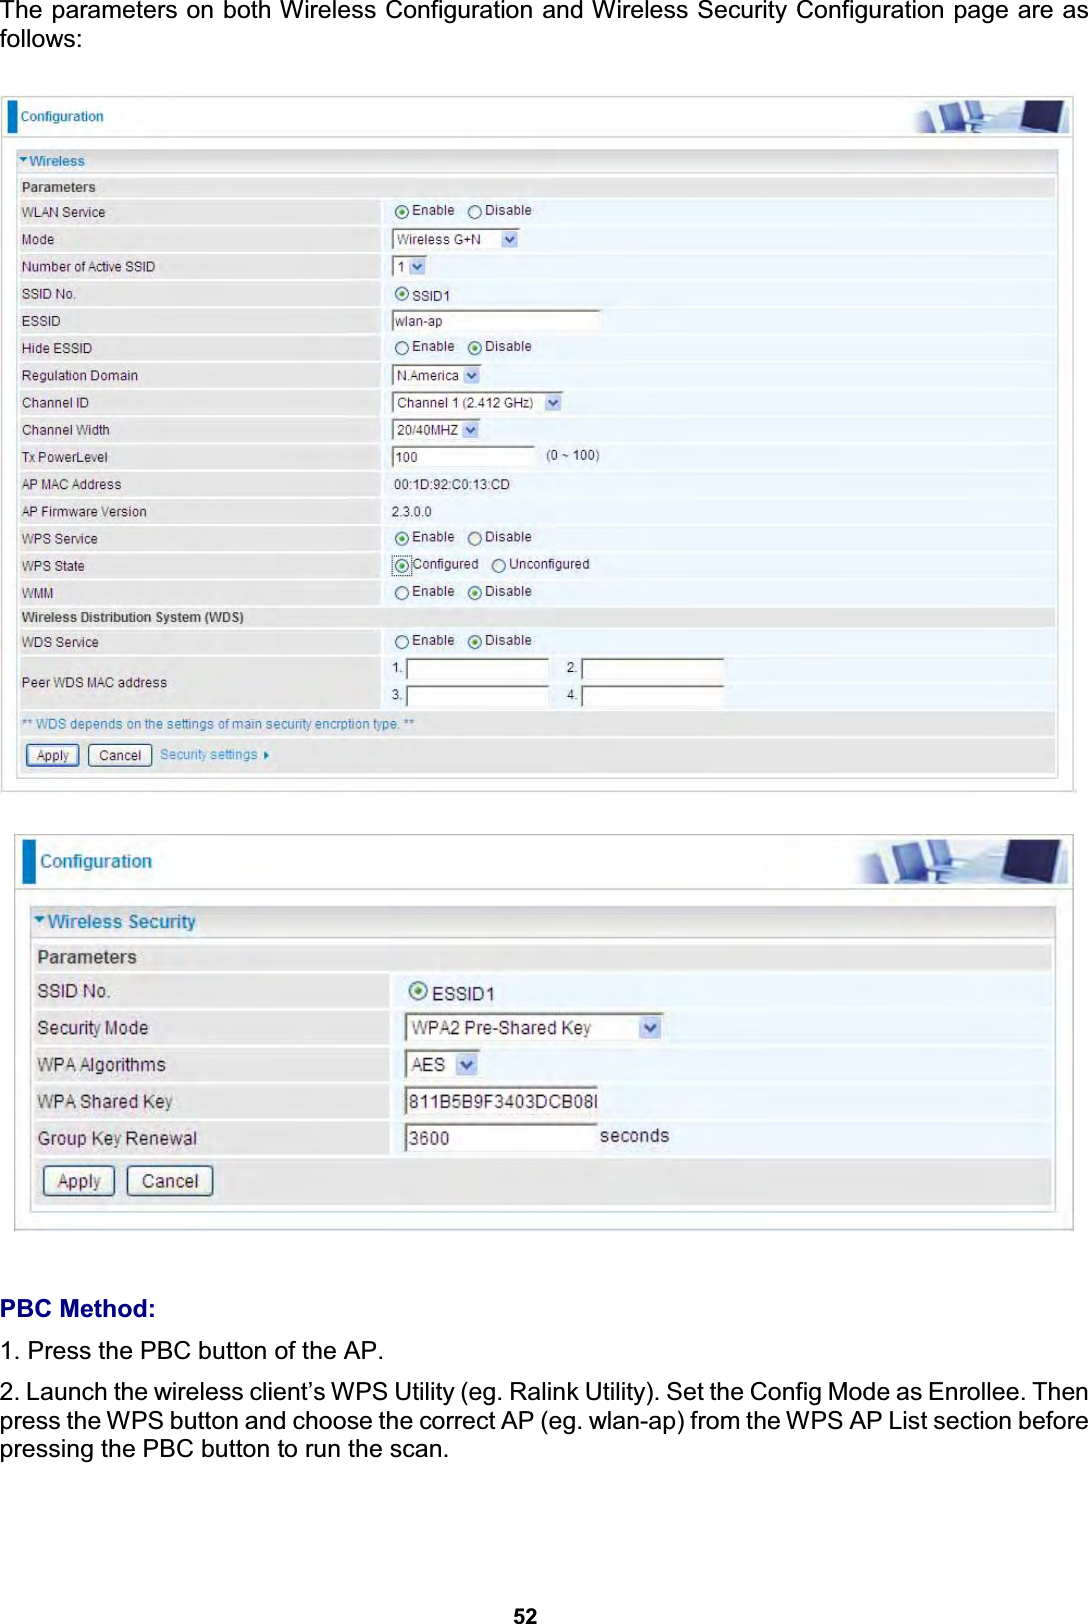  52 The parameters on both Wireless Configuration and Wireless Security Configuration page are as follows:       PBC Method: 1. Press the PBC button of the AP. 2. Launch the wireless client’s WPS Utility (eg. Ralink Utility). Set the Config Mode as Enrollee. Then press the WPS button and choose the correct AP (eg. wlan-ap) from the WPS AP List section before pressing the PBC button to run the scan. 